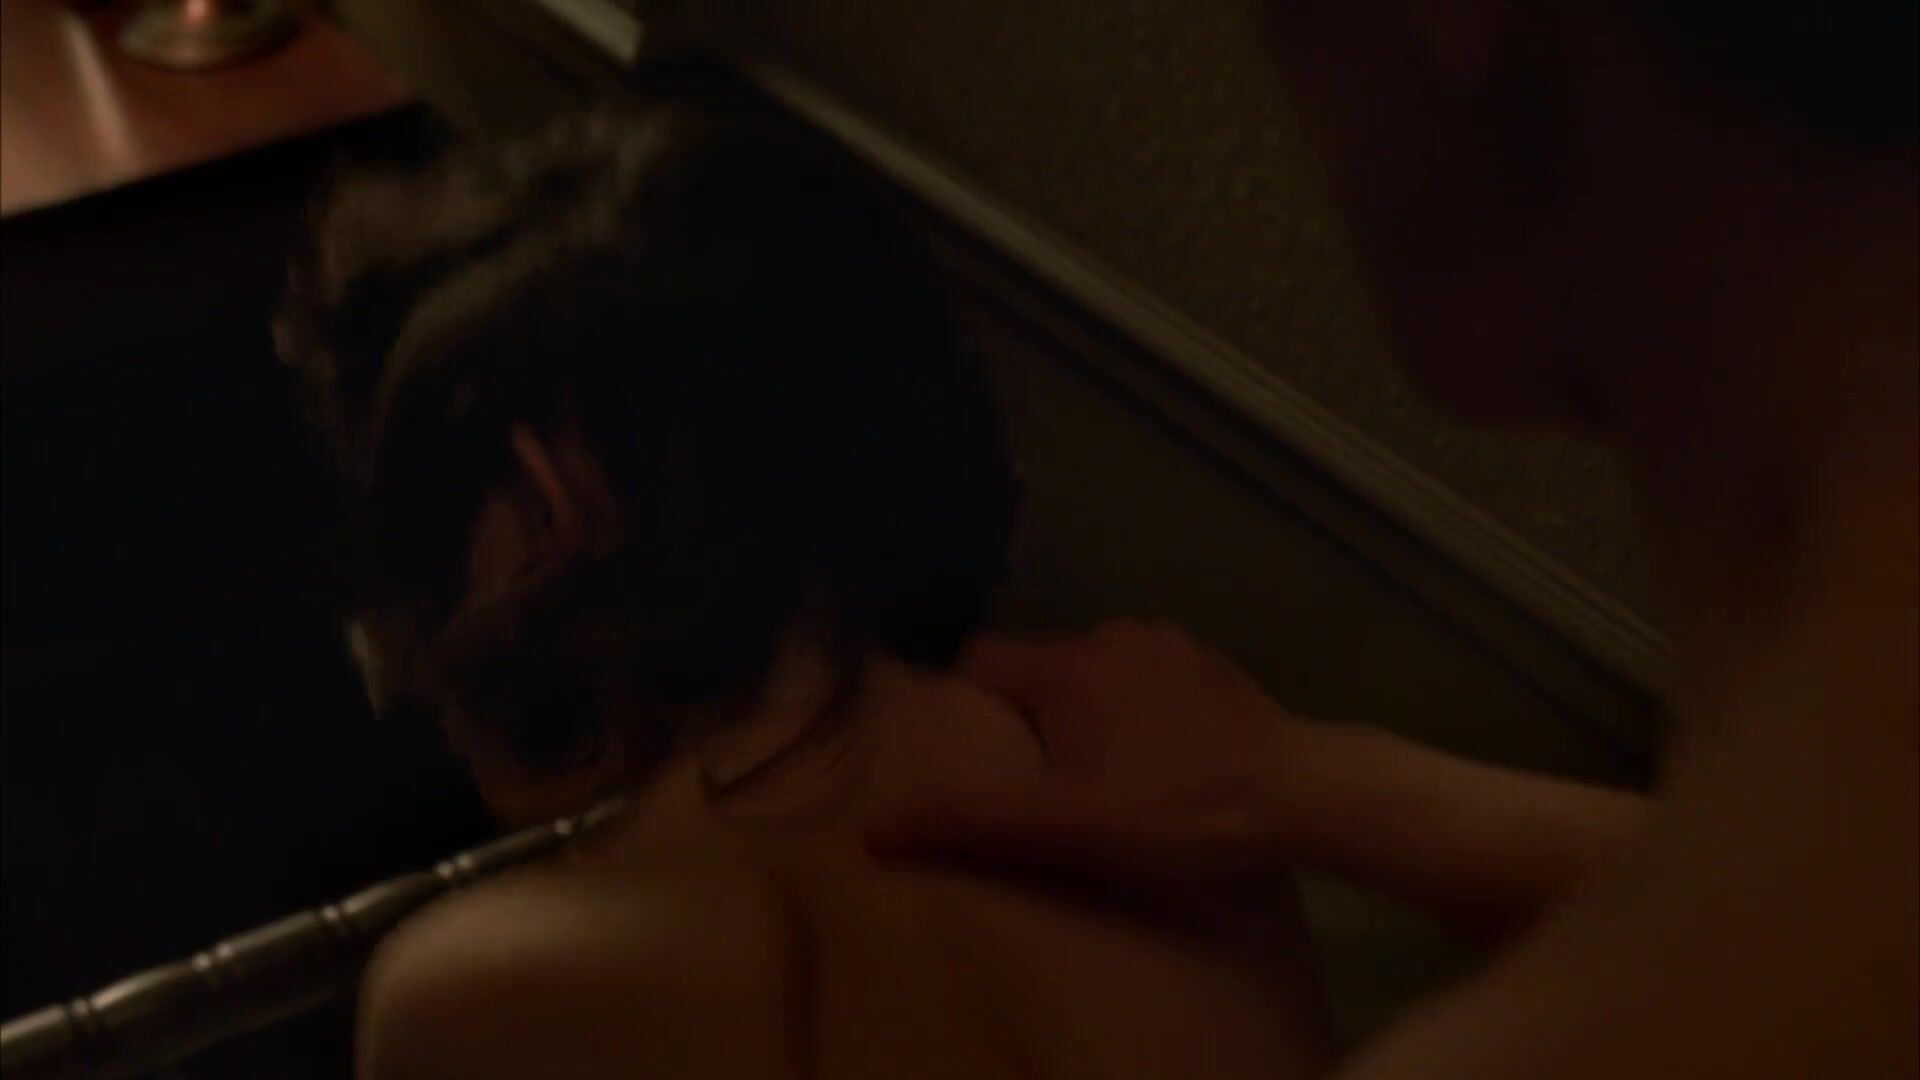 TubeAss Man takes hot housewife and scores her cunt cumming right inside in Boardwalk Empire Boobies